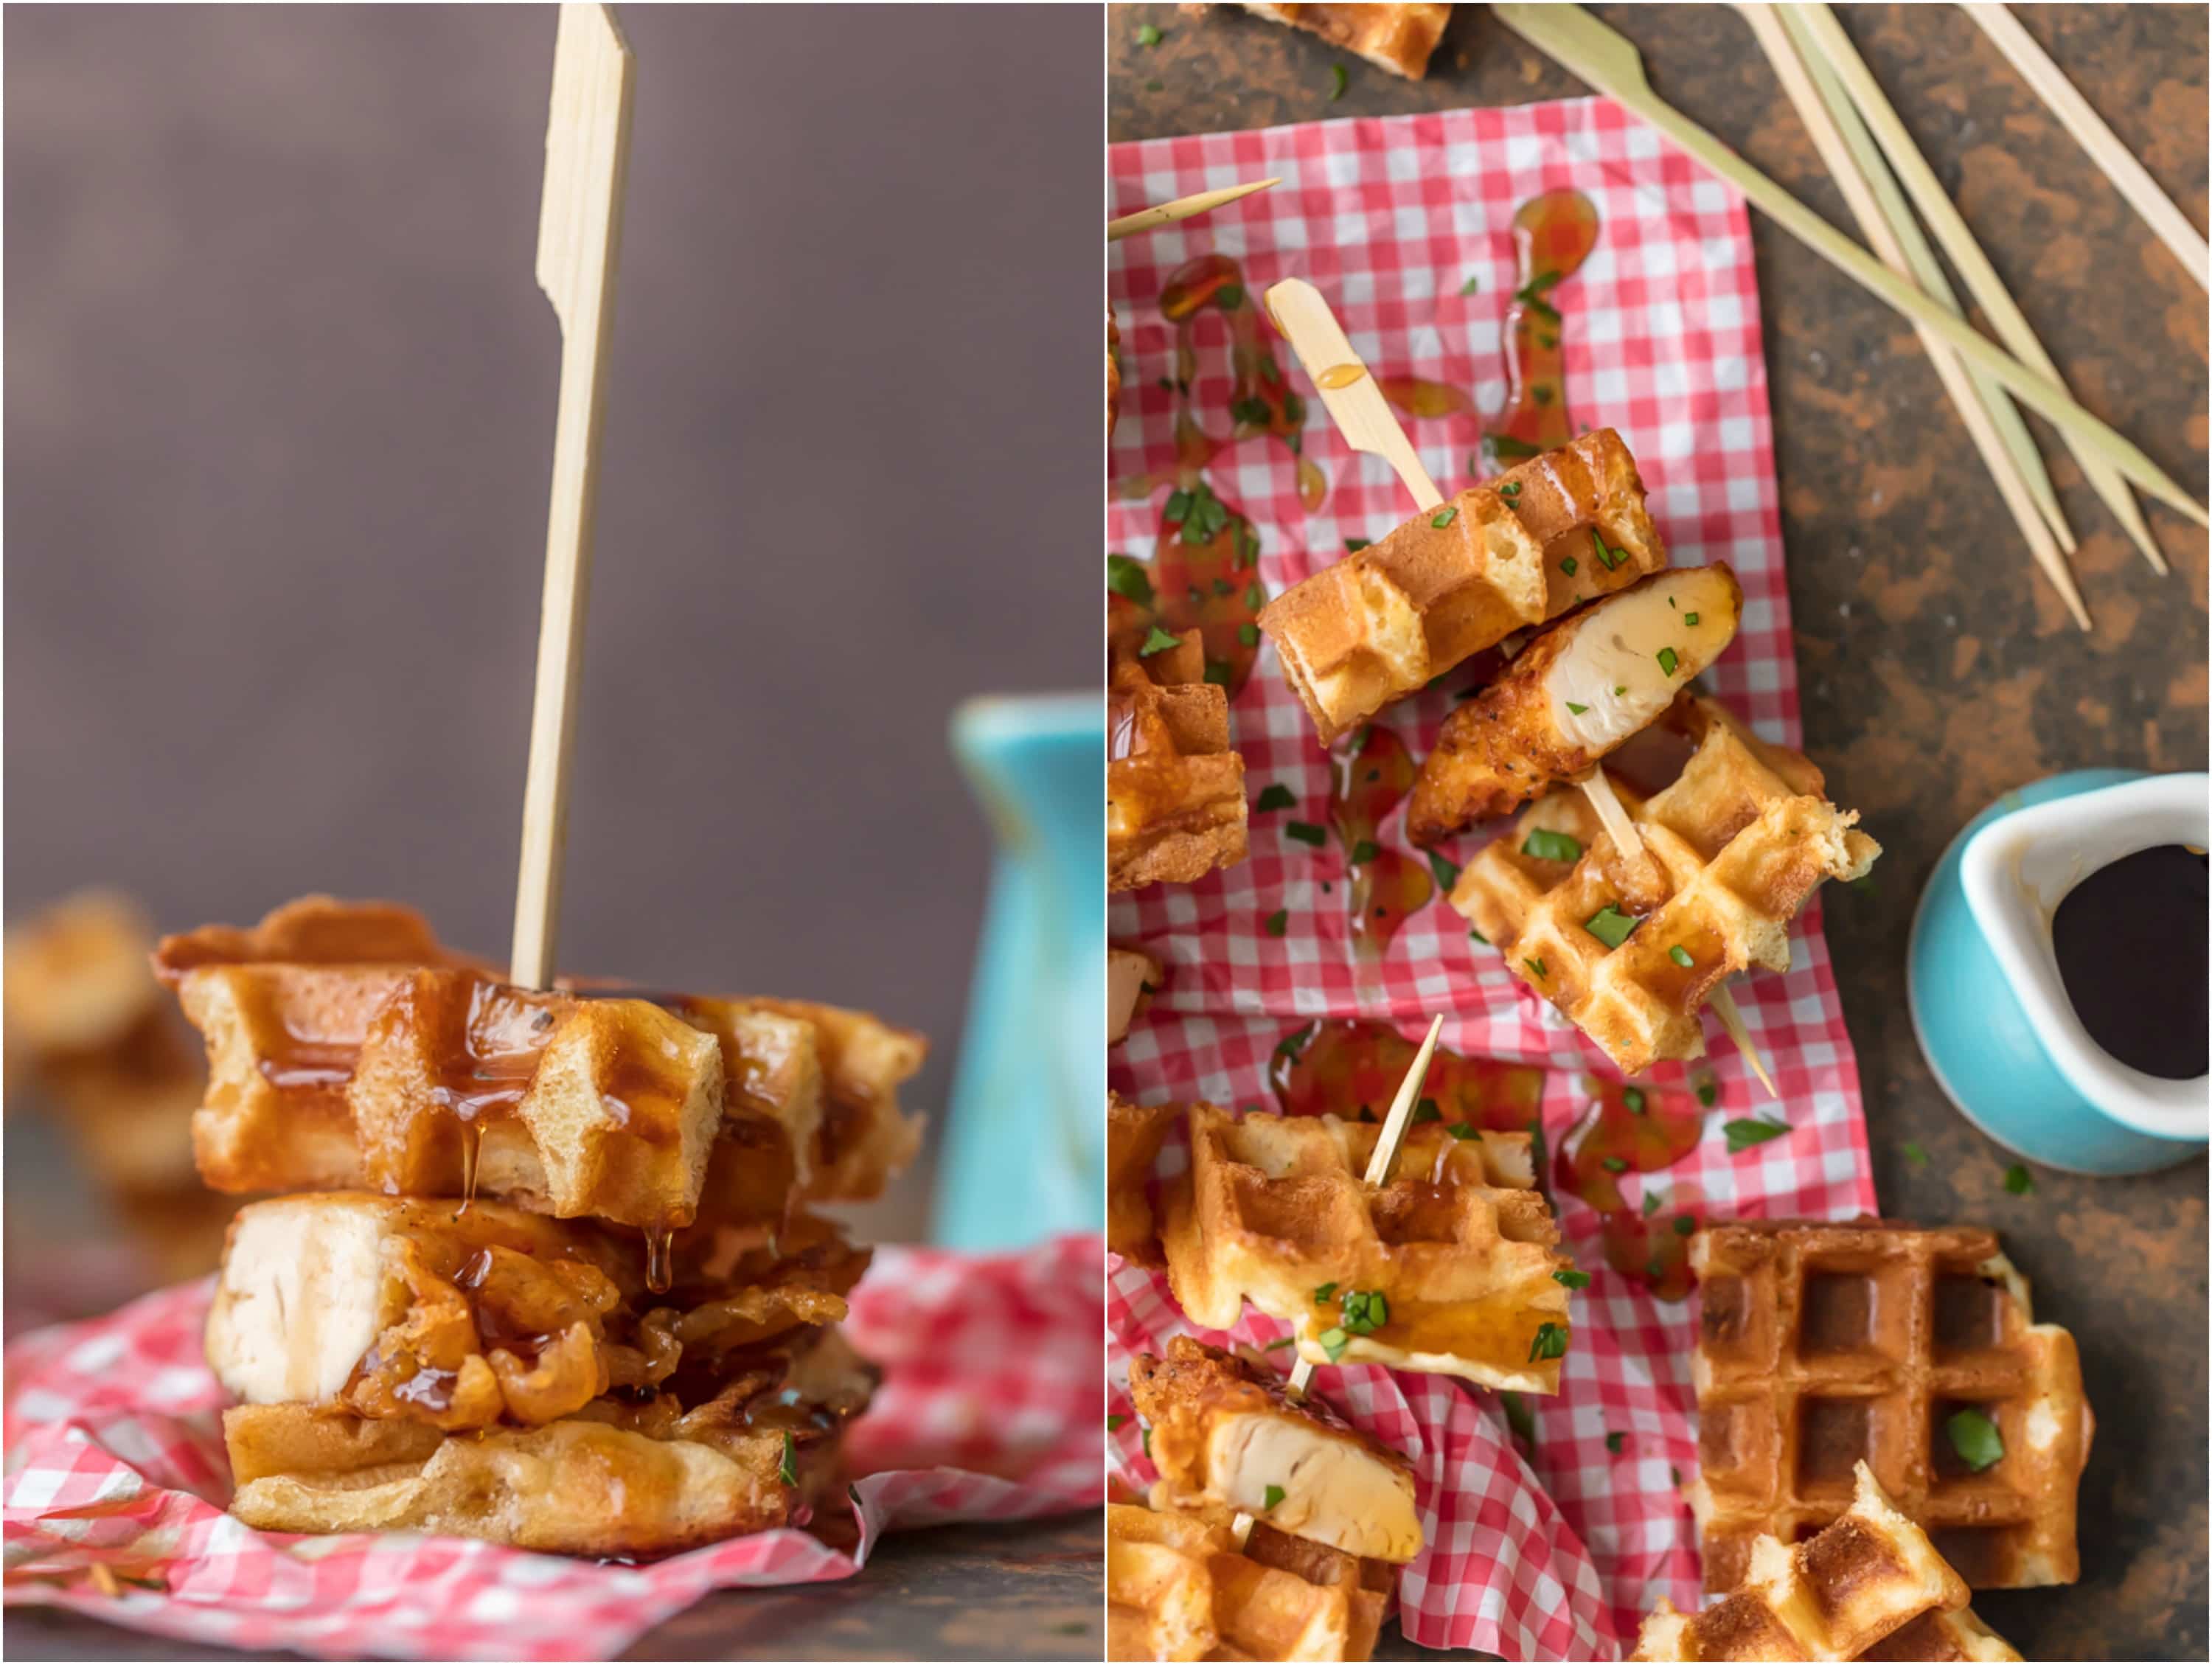 Mini Chicken and Waffles Recipe, arranged on red and white cloth